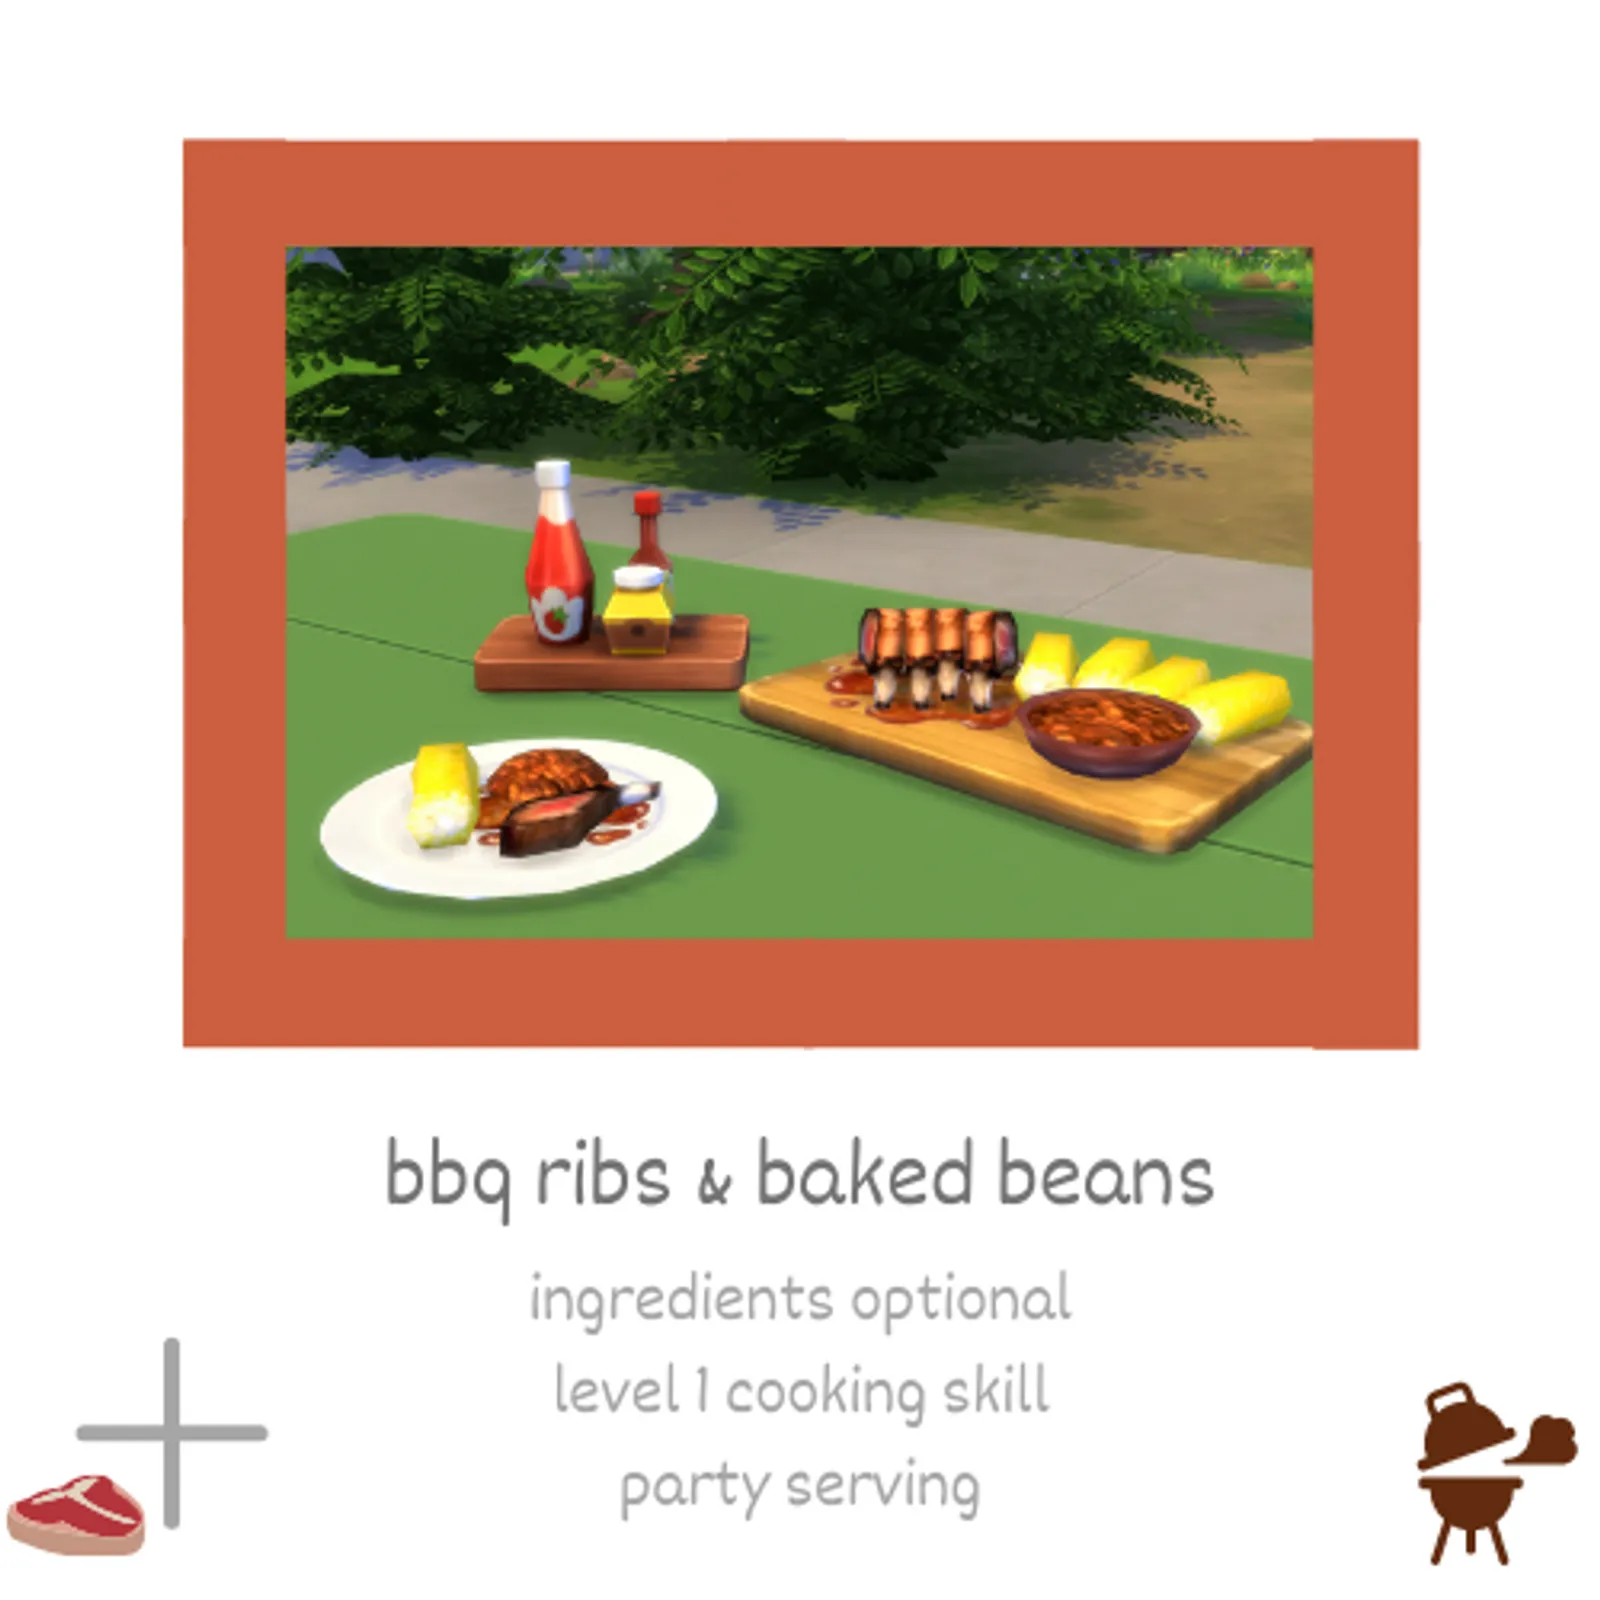 bbq ribs & baked beans